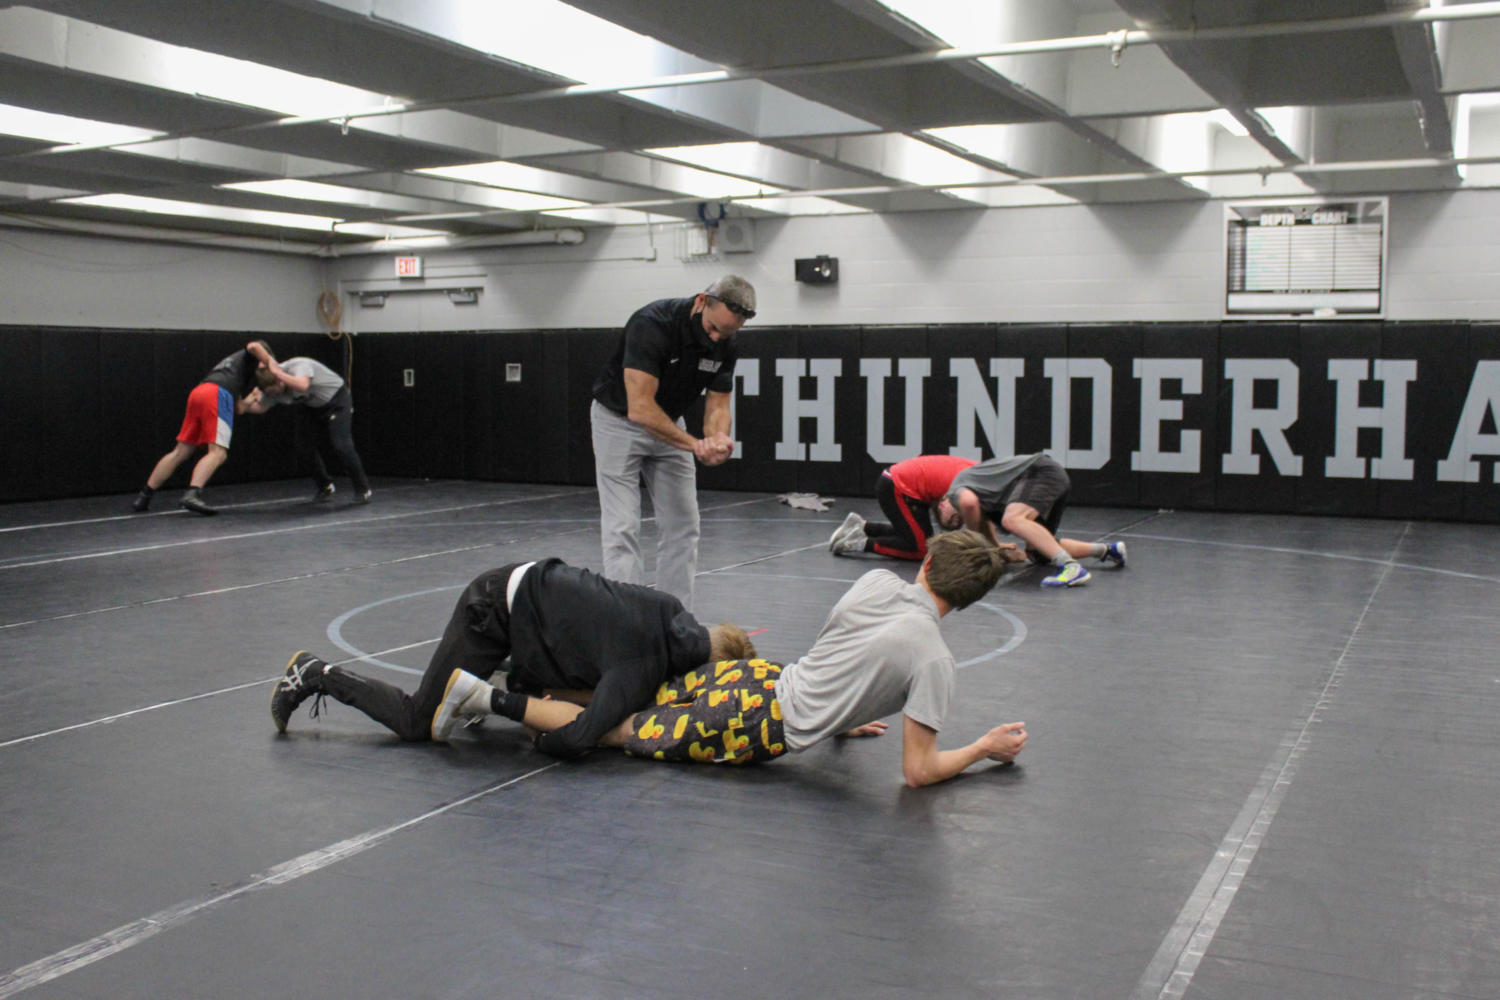 Under+the+watch+of+veteran+coach+Scott+Fetzer%2C+East+wrestlers+follow+their+new+safety+protocols+during+practice+by+sticking+to+one+opponent+and+spacing+out+on+the+mat.